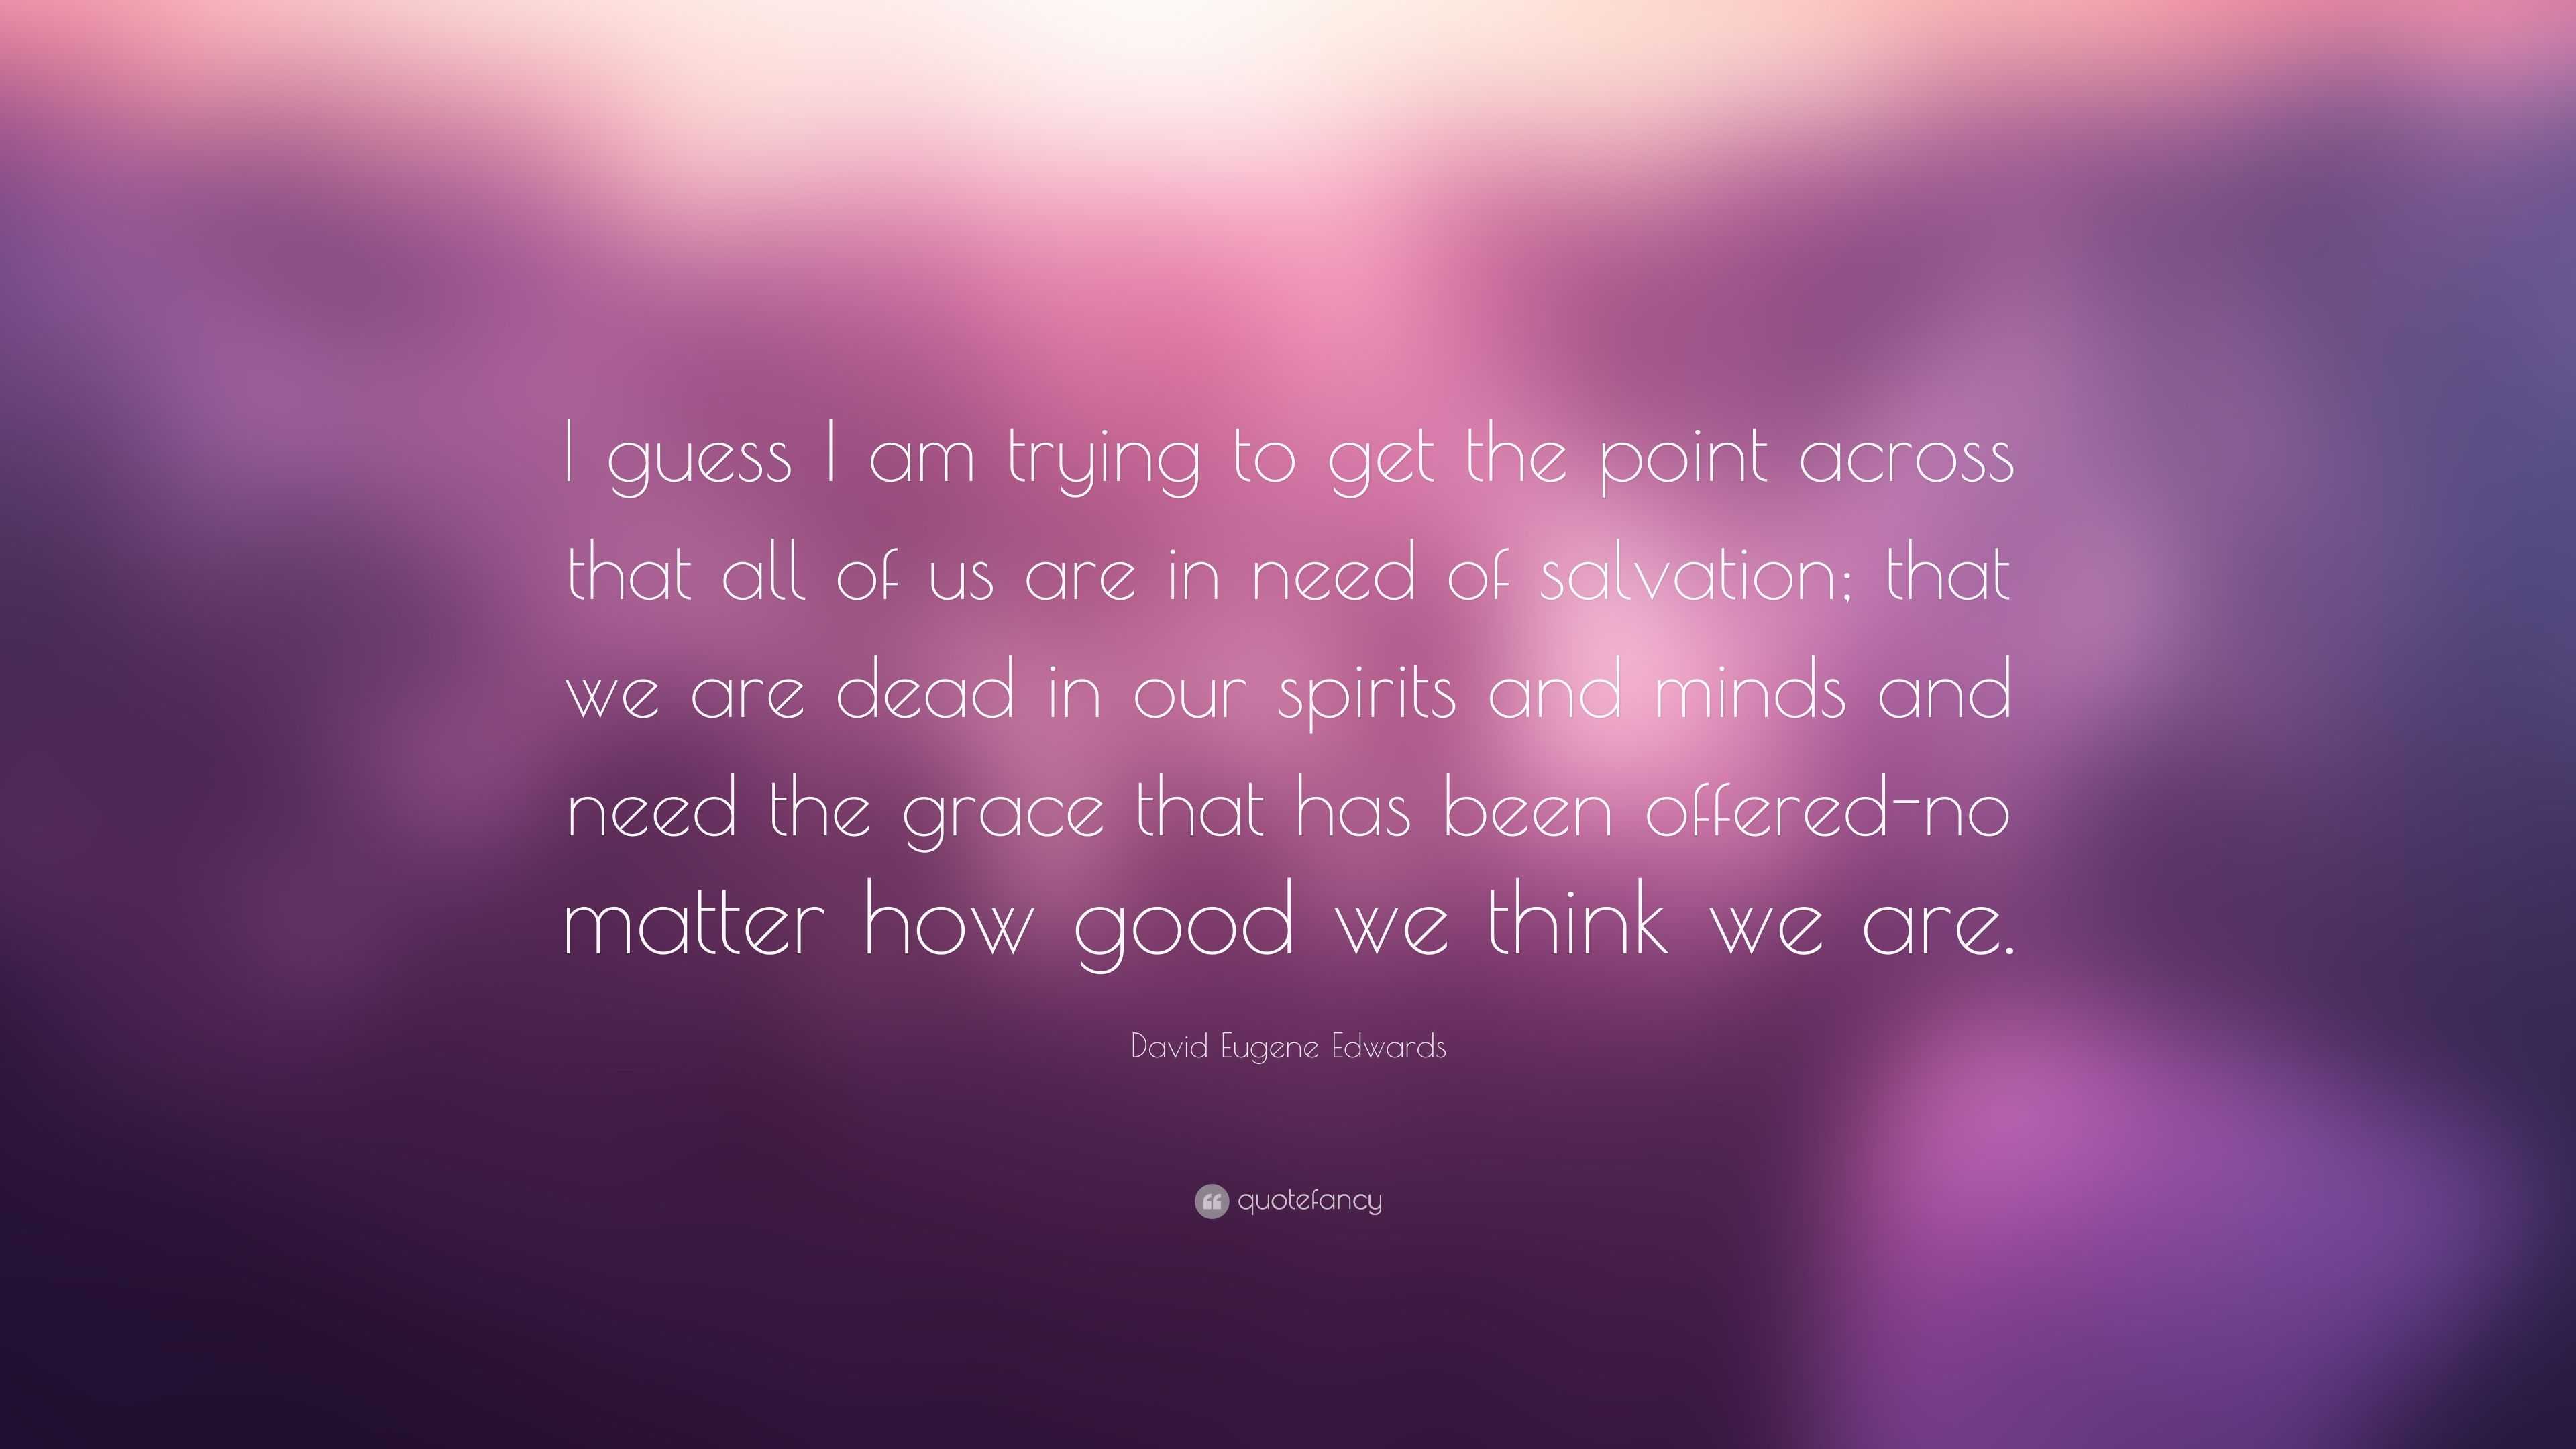 David Eugene Edwards Quote: guess I am trying to get the point across that all of us are in need of salvation; that we are dead in our spirits and...”